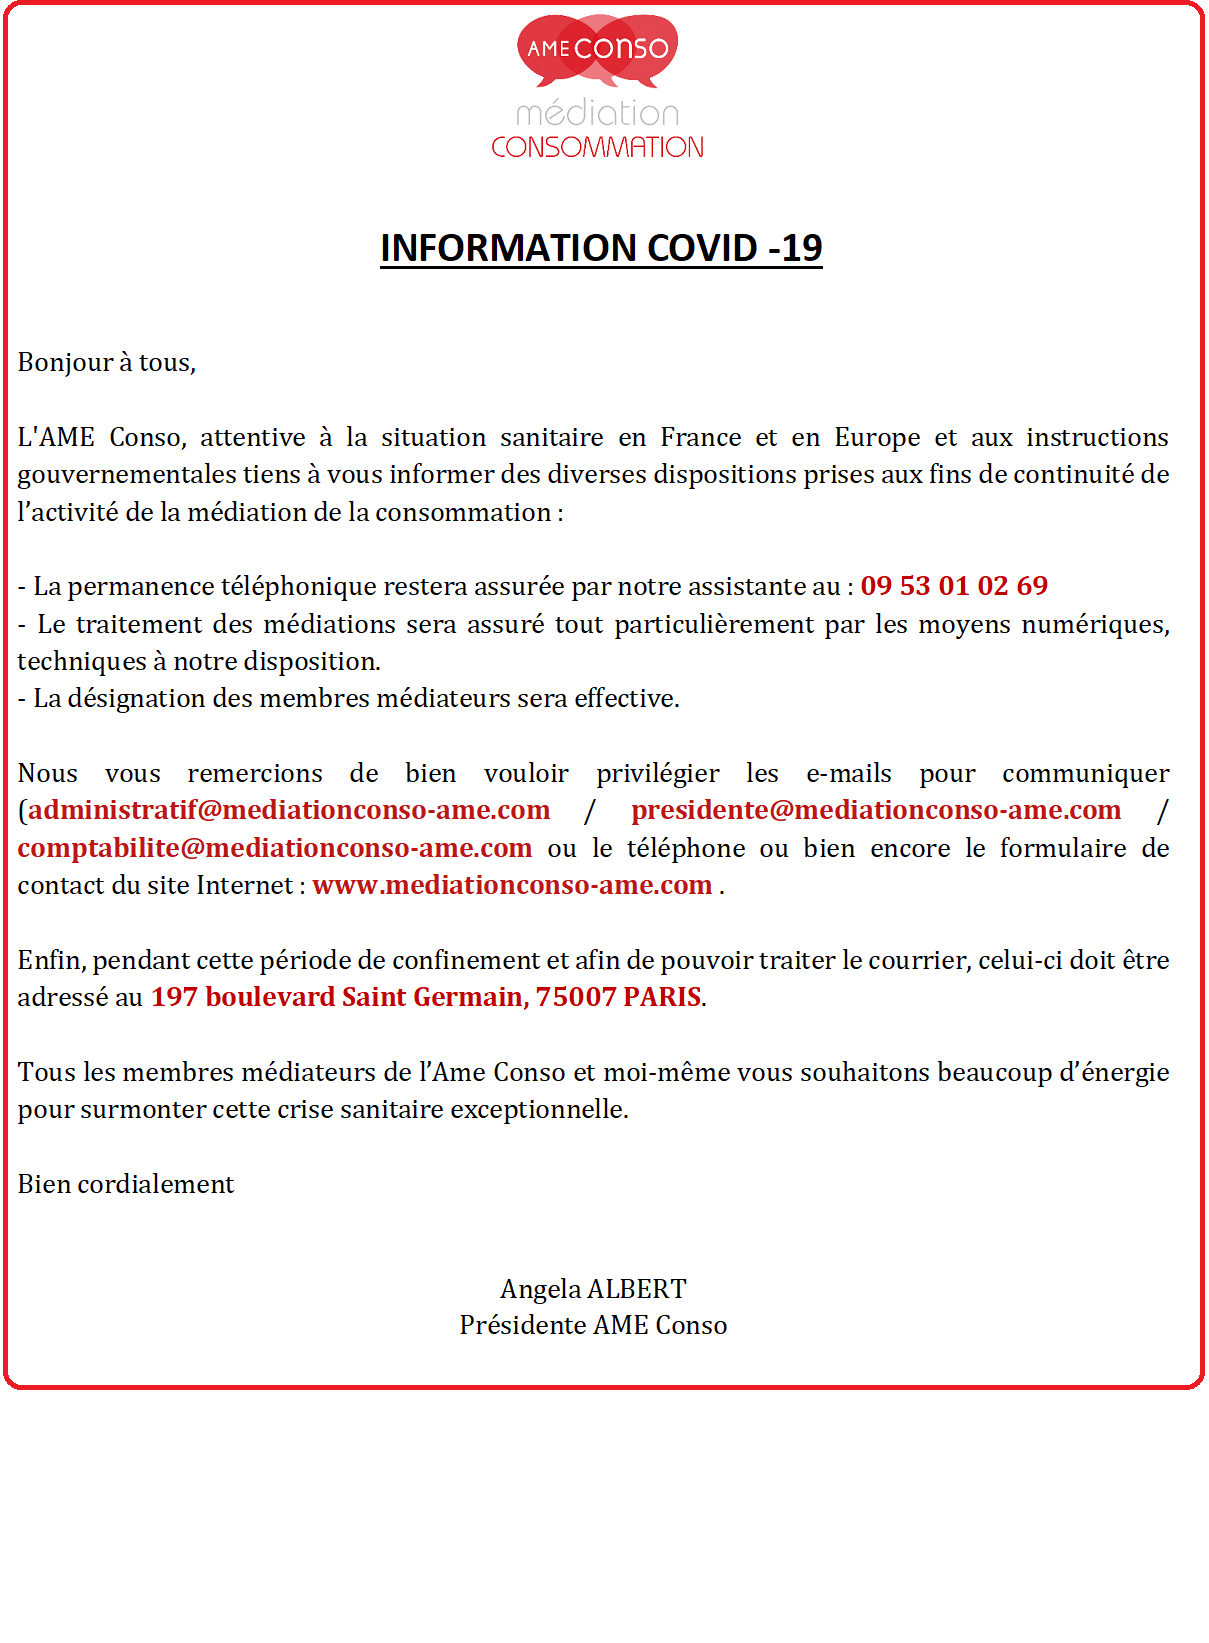 Information COVID 19 AME CONSO 1